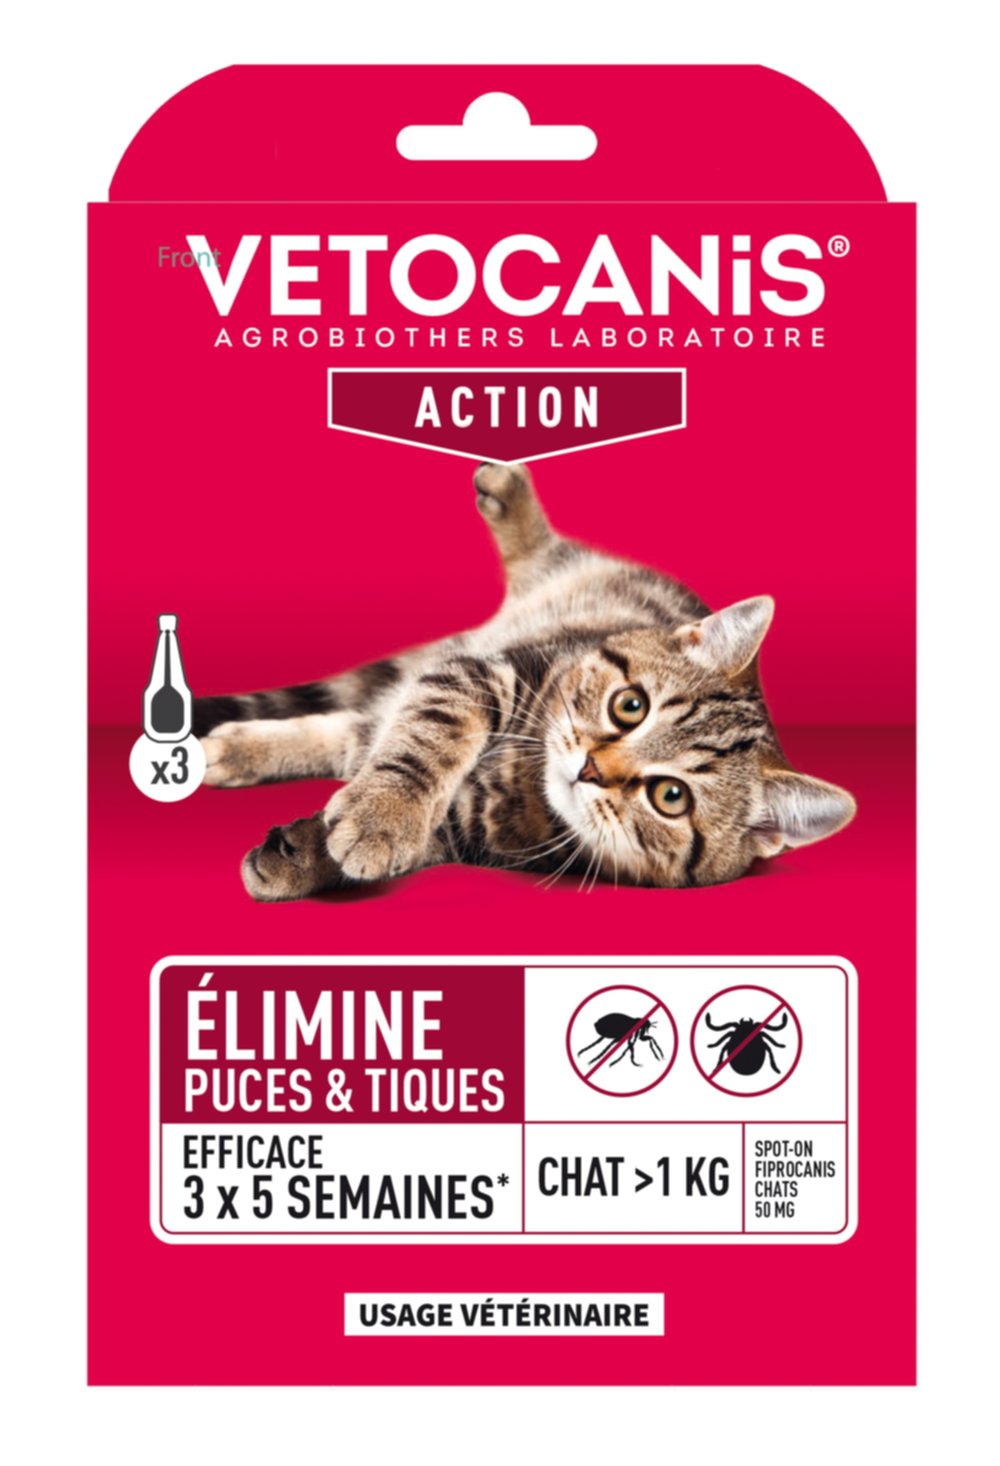 Spot on fiprocanis chat 50mg x3